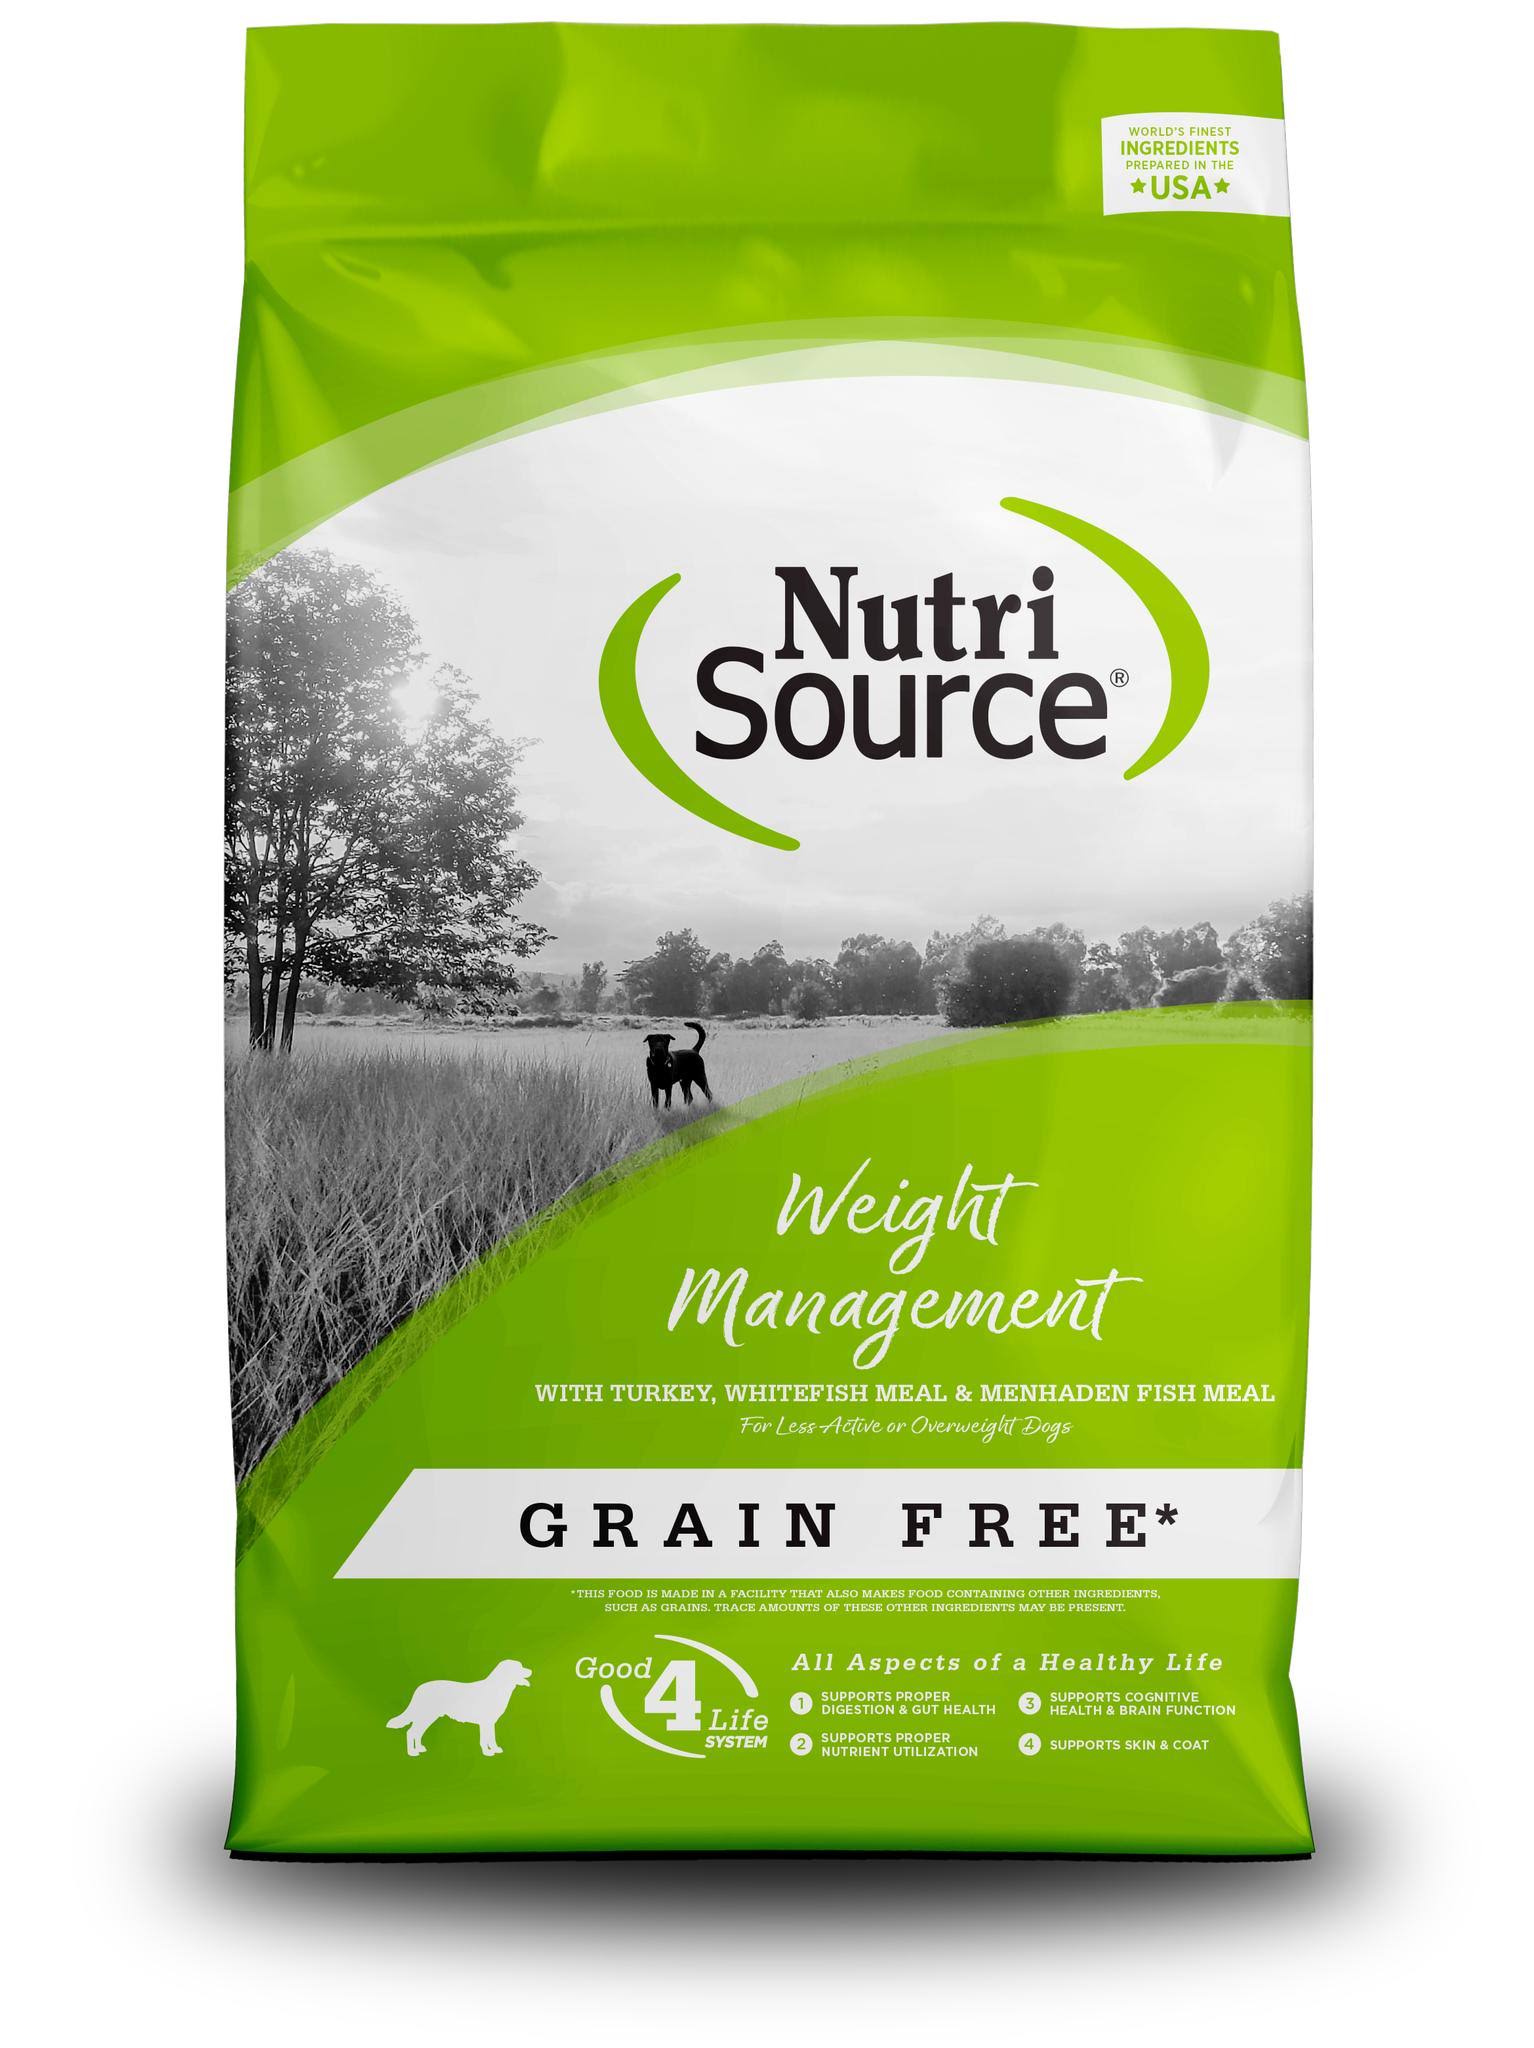 NutriSource Grain Free Weight Management Dry Dog Food 26 lbs